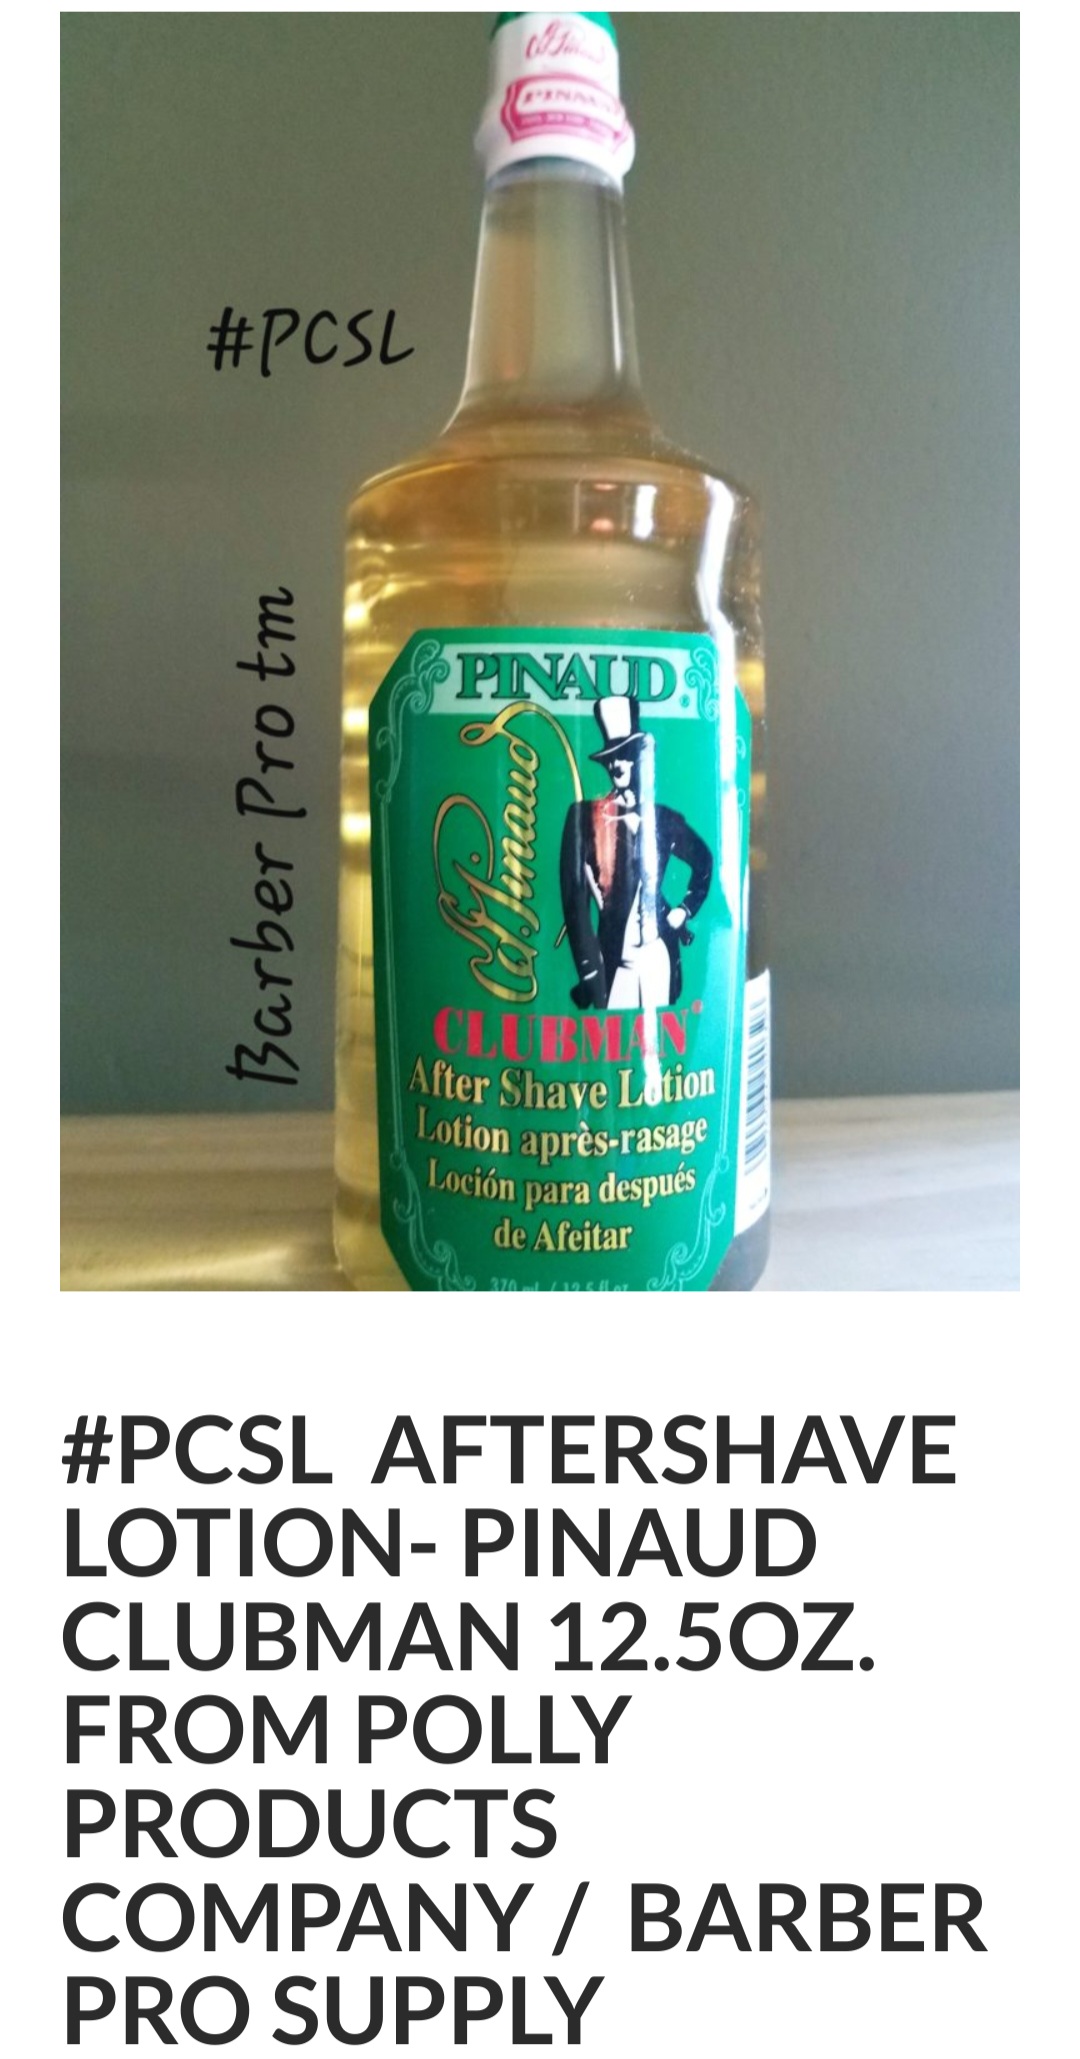 #PCSL Pinaud Clubman Aftershave from Polly Products/BARBER PRO tm 